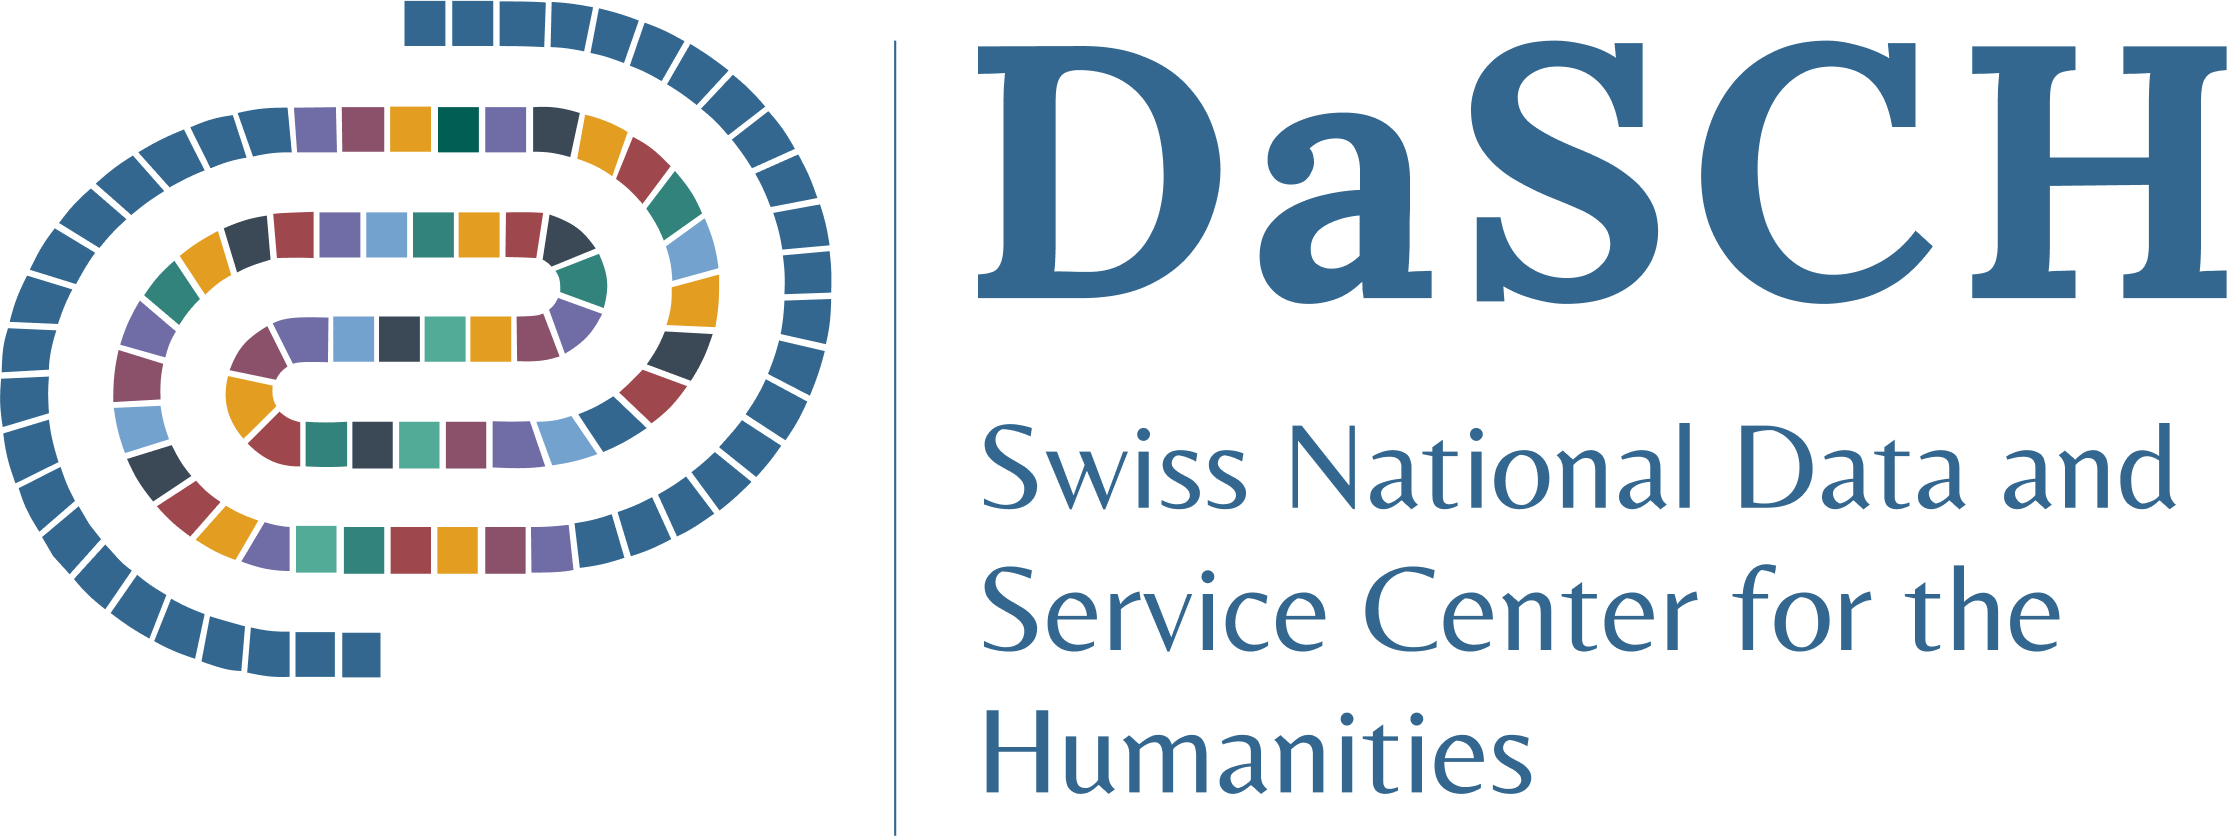 Data and Service Center for the Humanities DaSCH